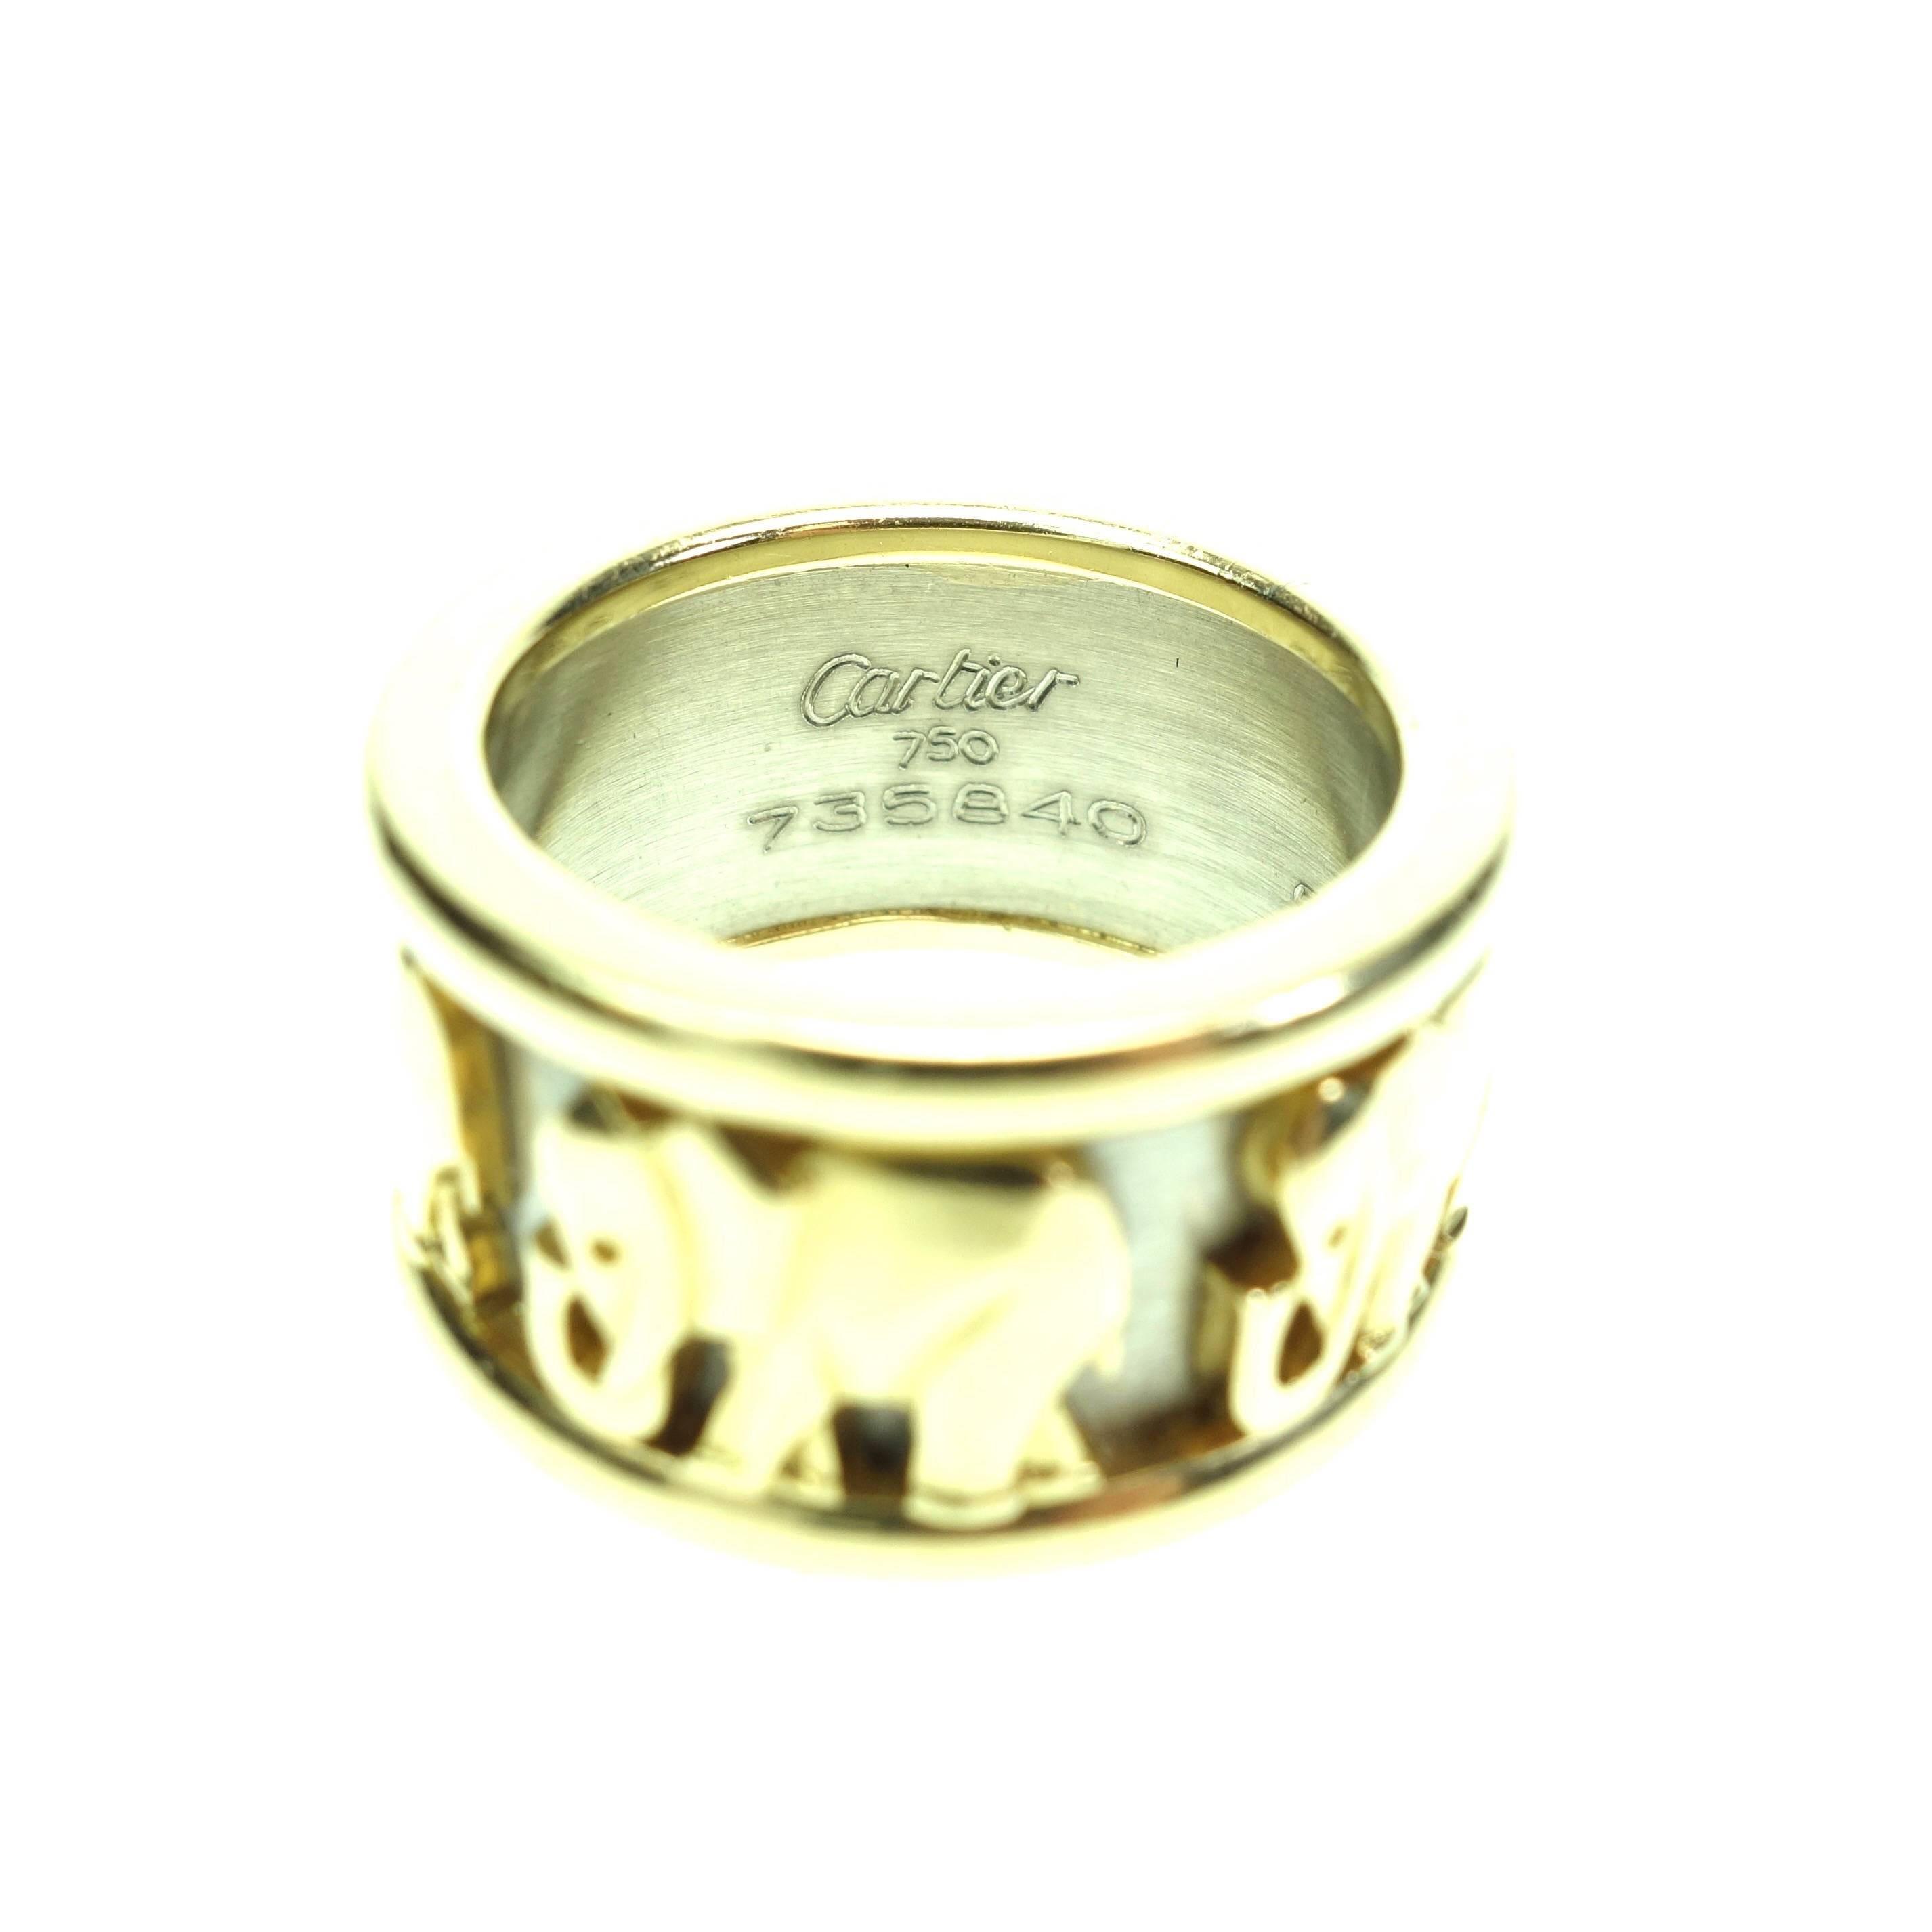 The ring has a high relief carving of elephants going around the entire ring. The relief portions are high polish and the sections that are set back have a white gold satin finish. 

Metal: 18K White & Yellow Gold
Hallmark: Cartier 750 735840